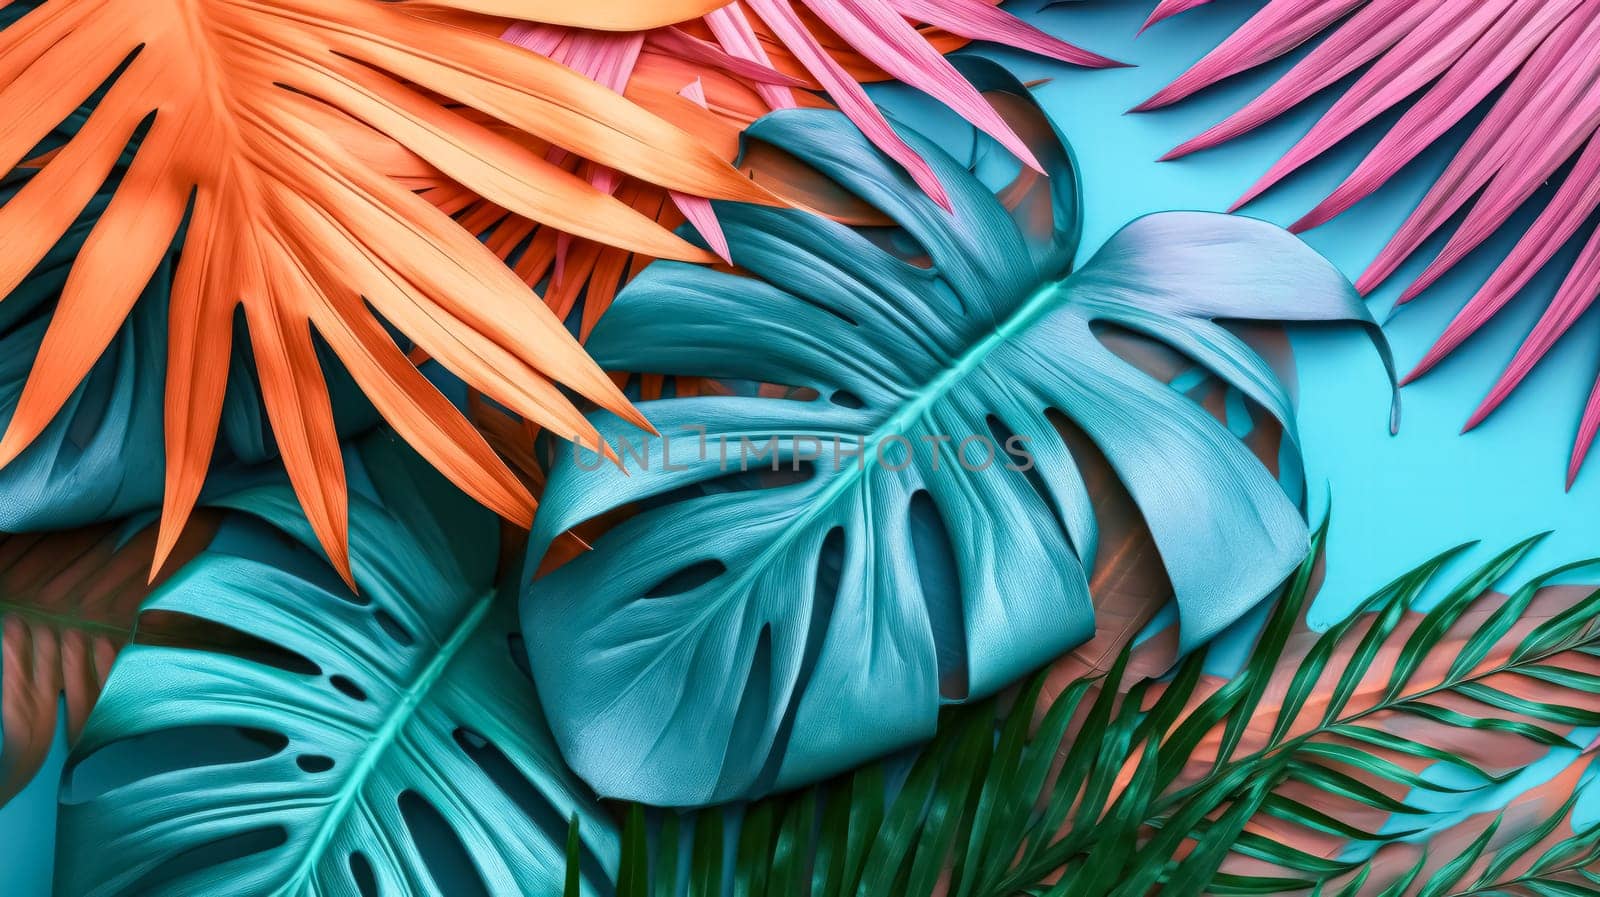 Vibrant and creative fluorescent color layout crafted from tropical leaves by Alla_Morozova93